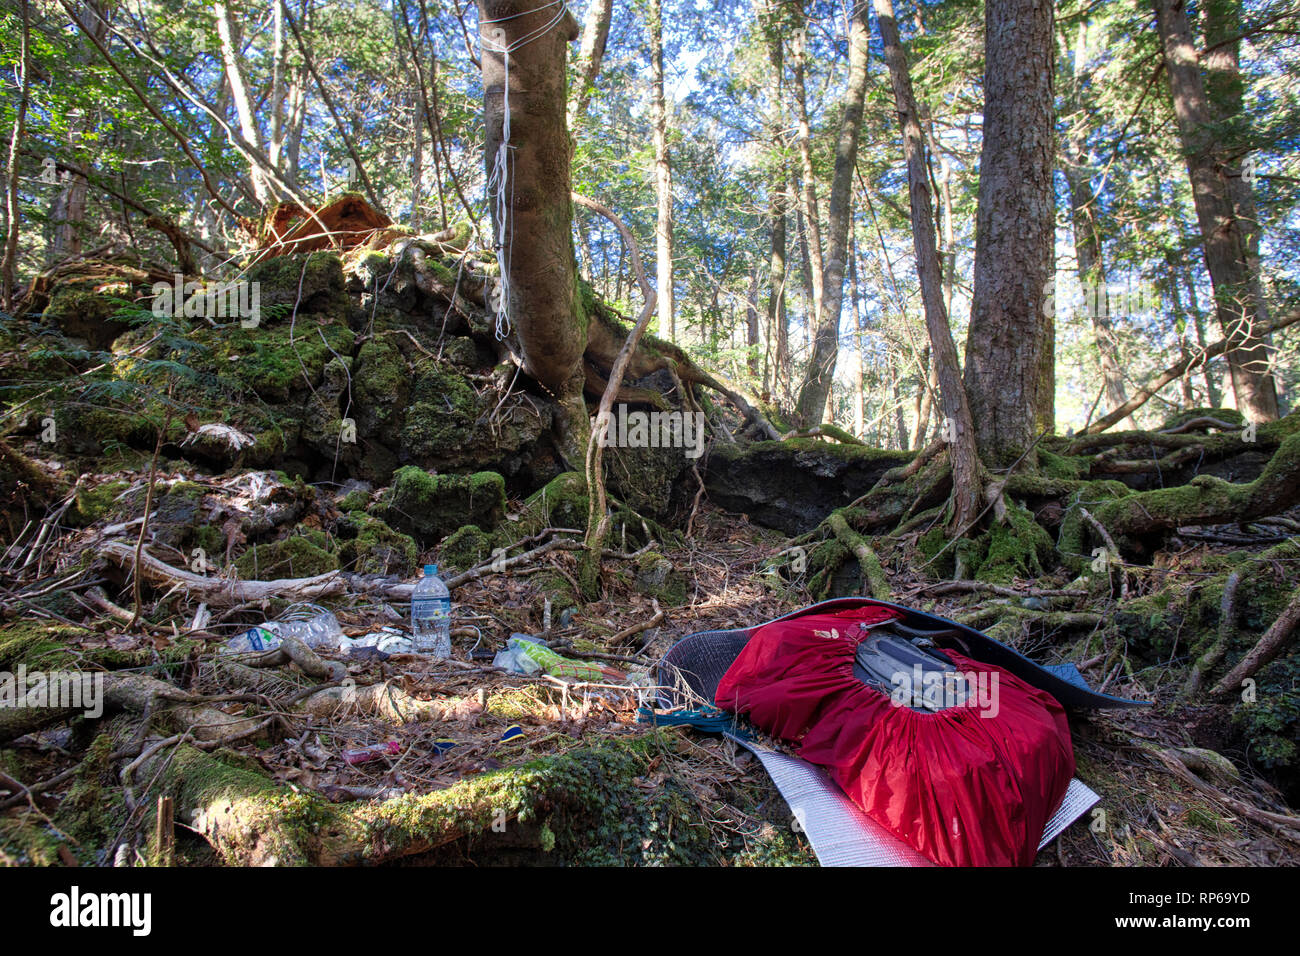 Scattered belongings on the floor of the Aokigahara suicide forest in Tokyo, Japan Stock Photo